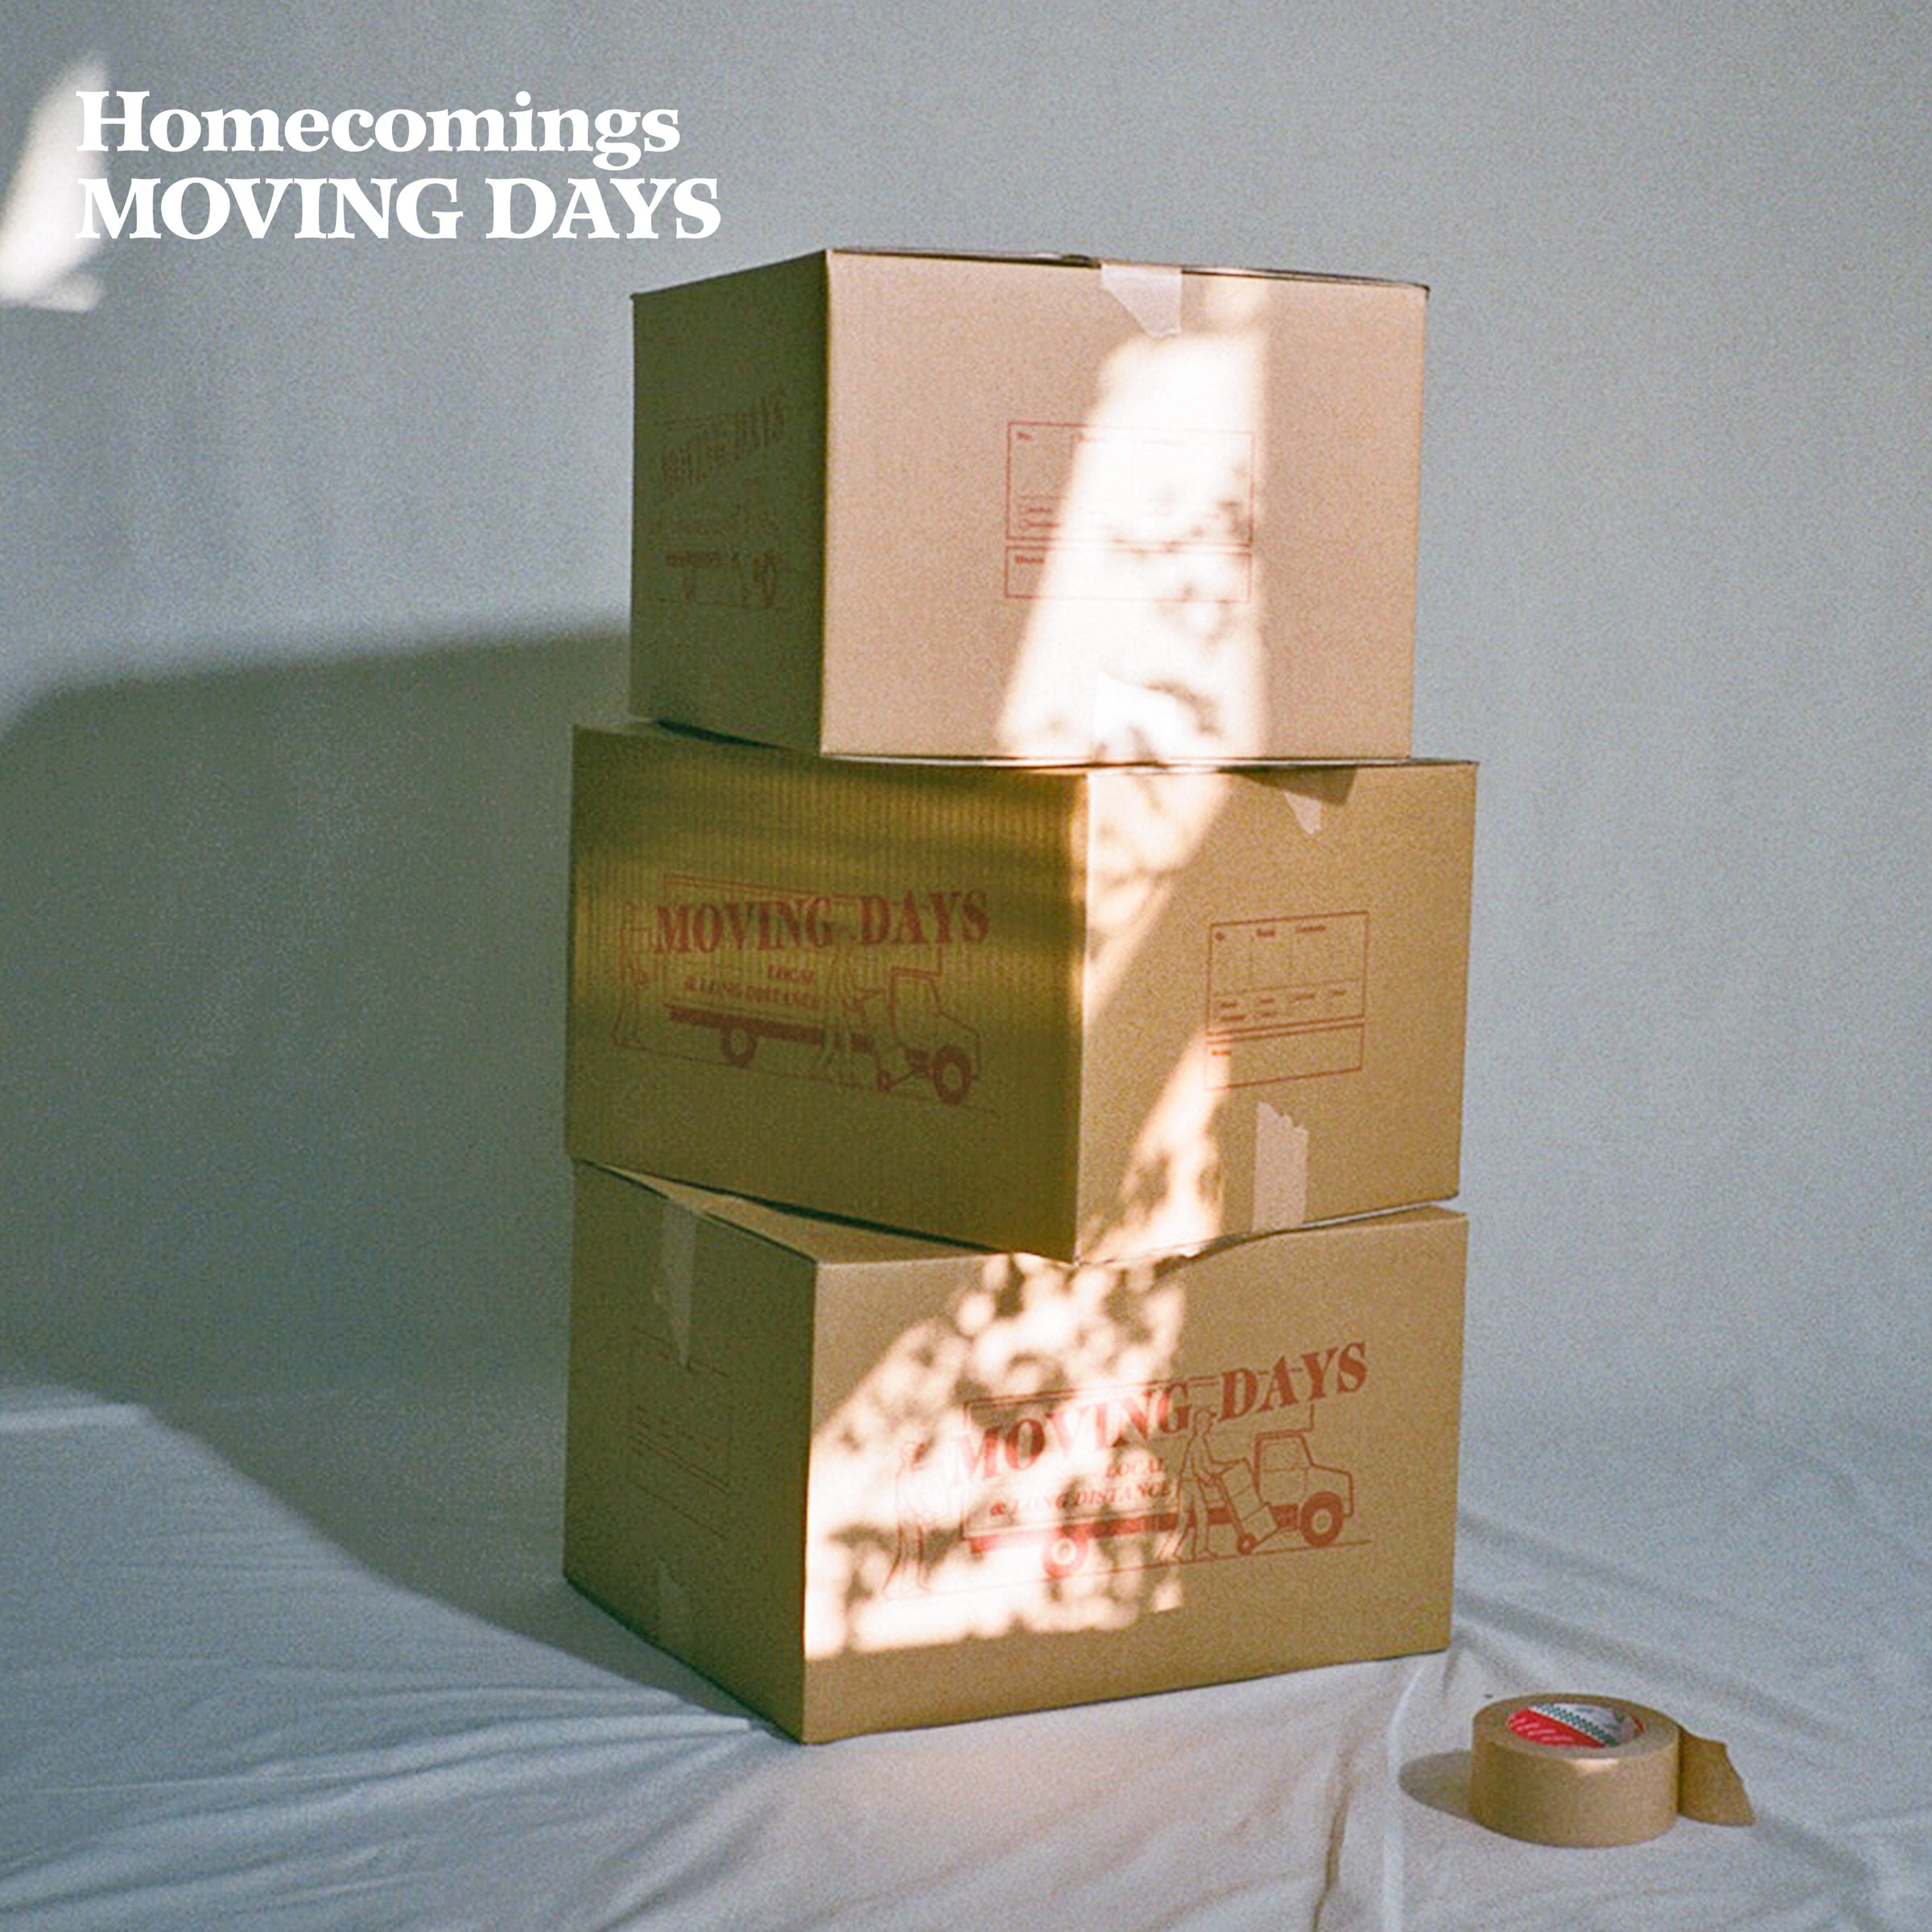 Homecomings – Moving Days (2021-05-12) [FLAC 24bit/96kHz]